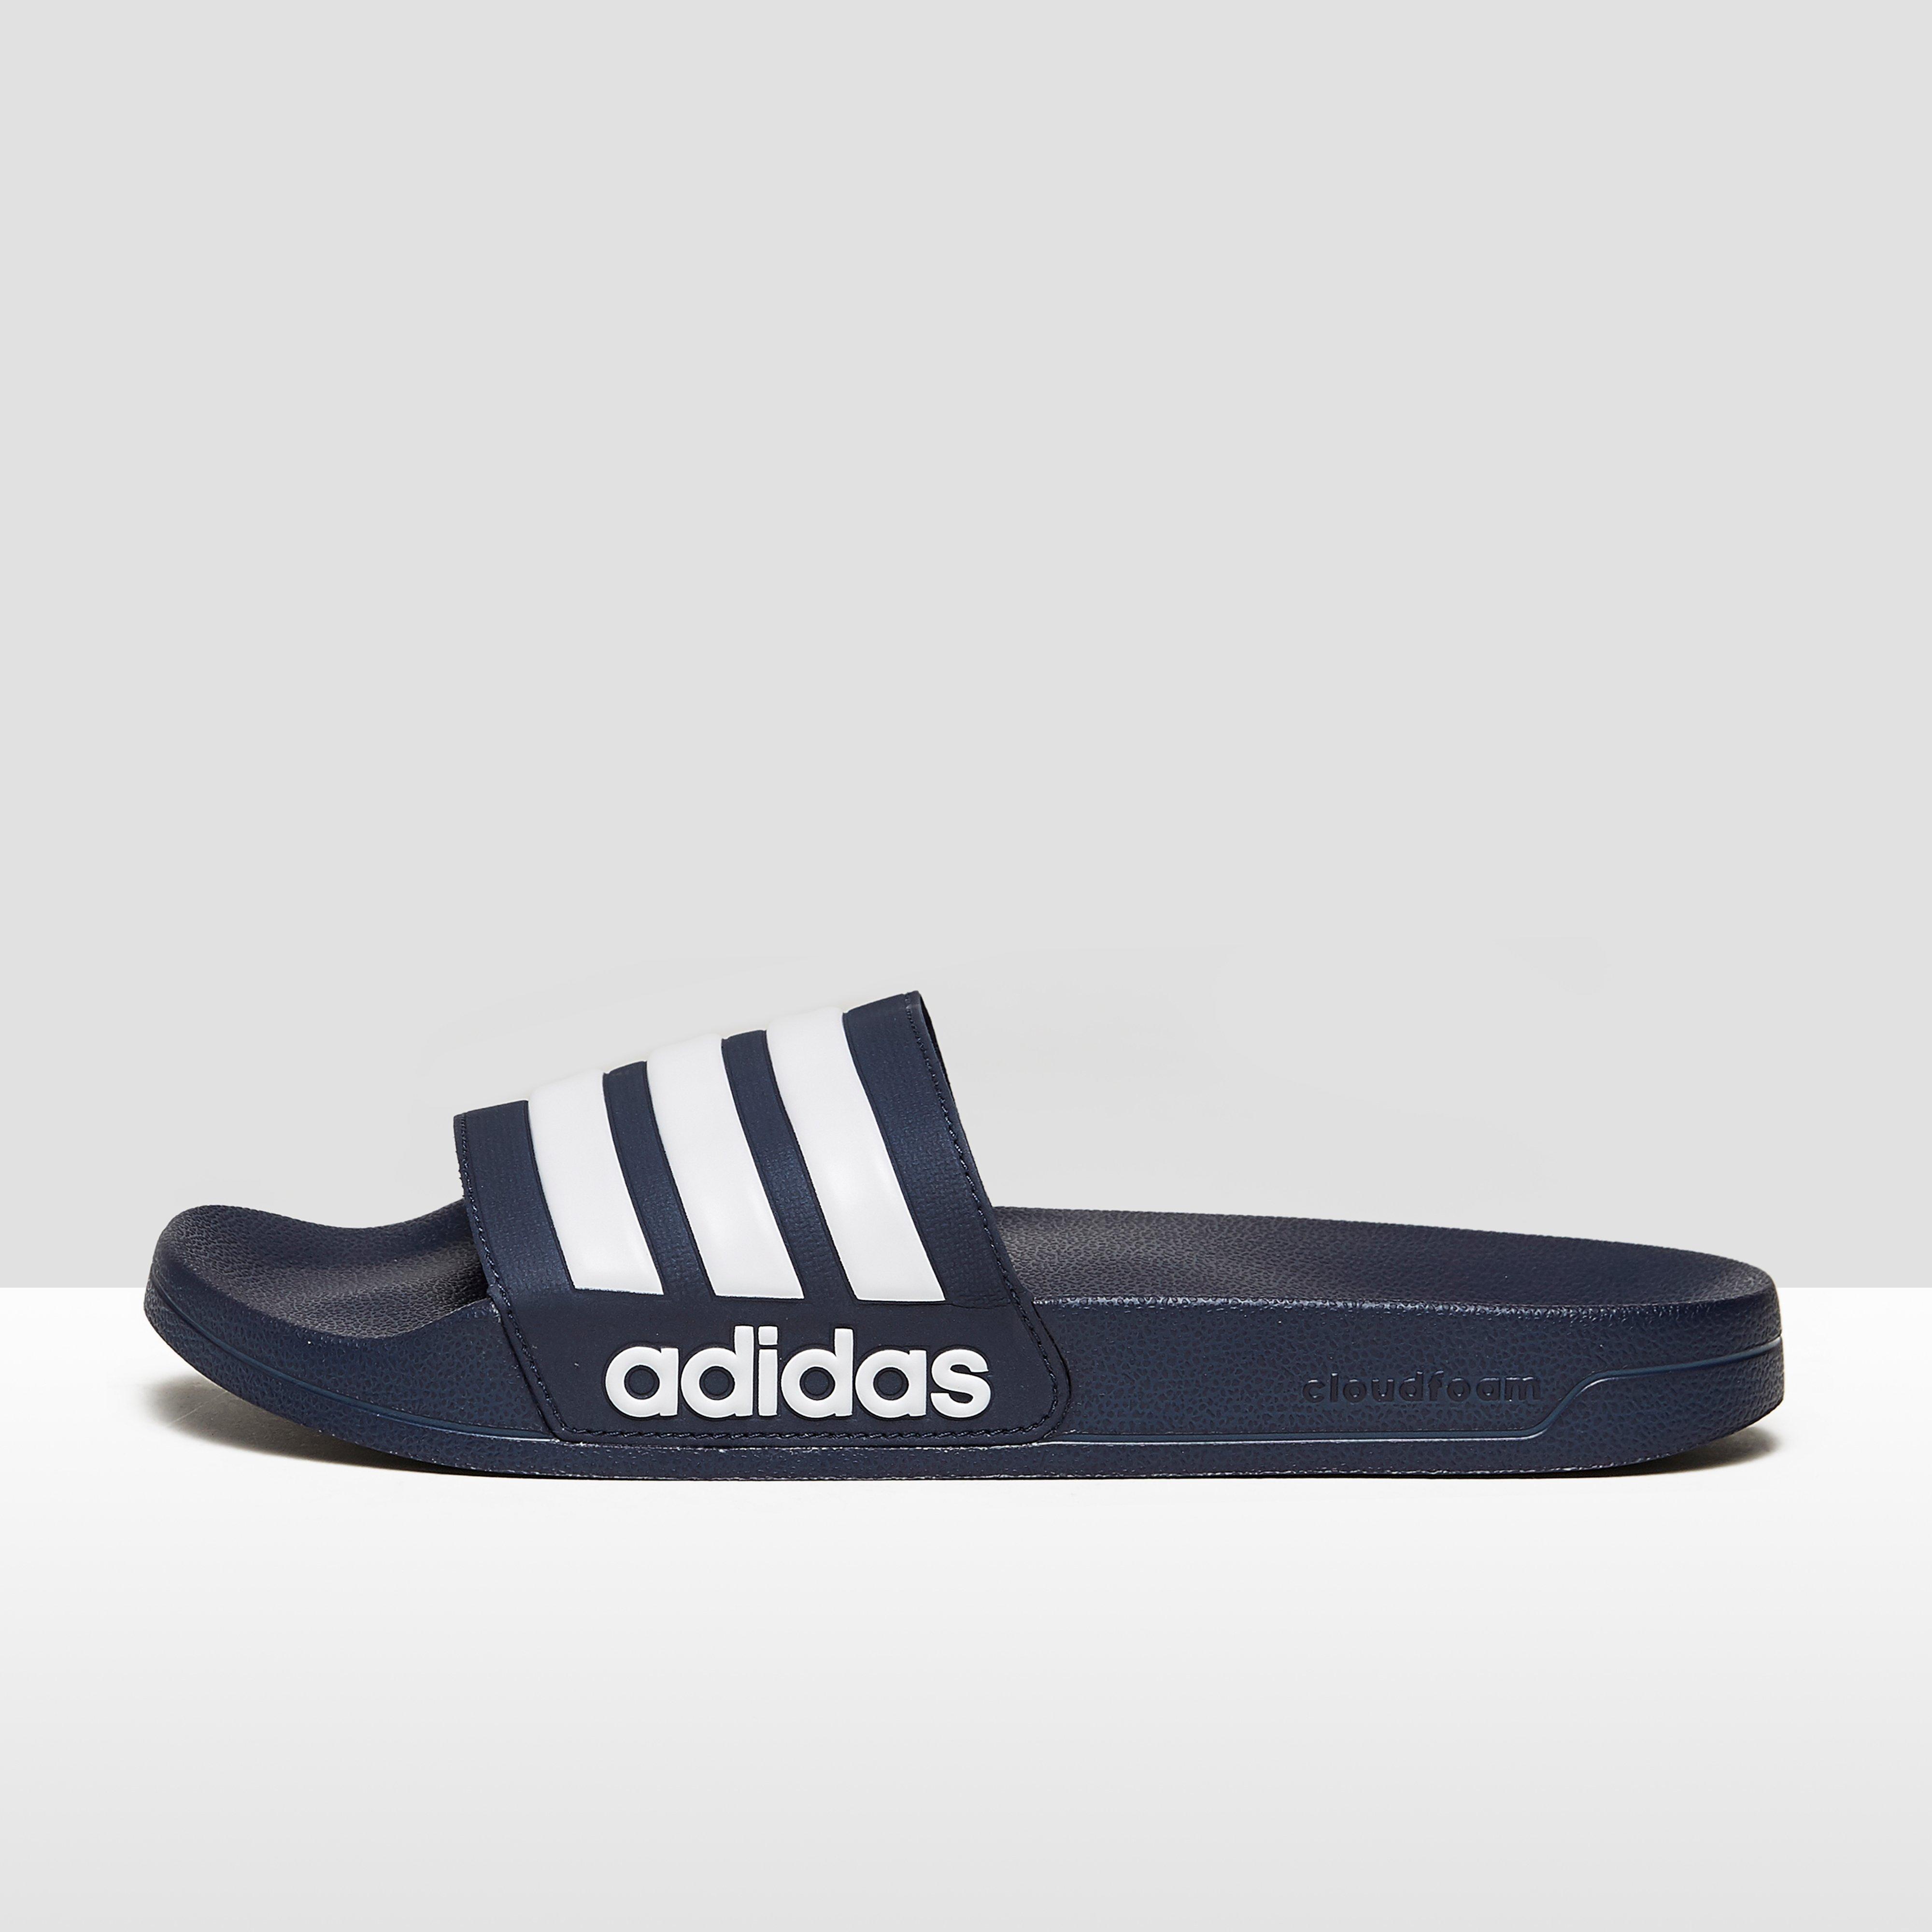 adidas slippers dames lichtblauw, OFF 71%,Cheap price !